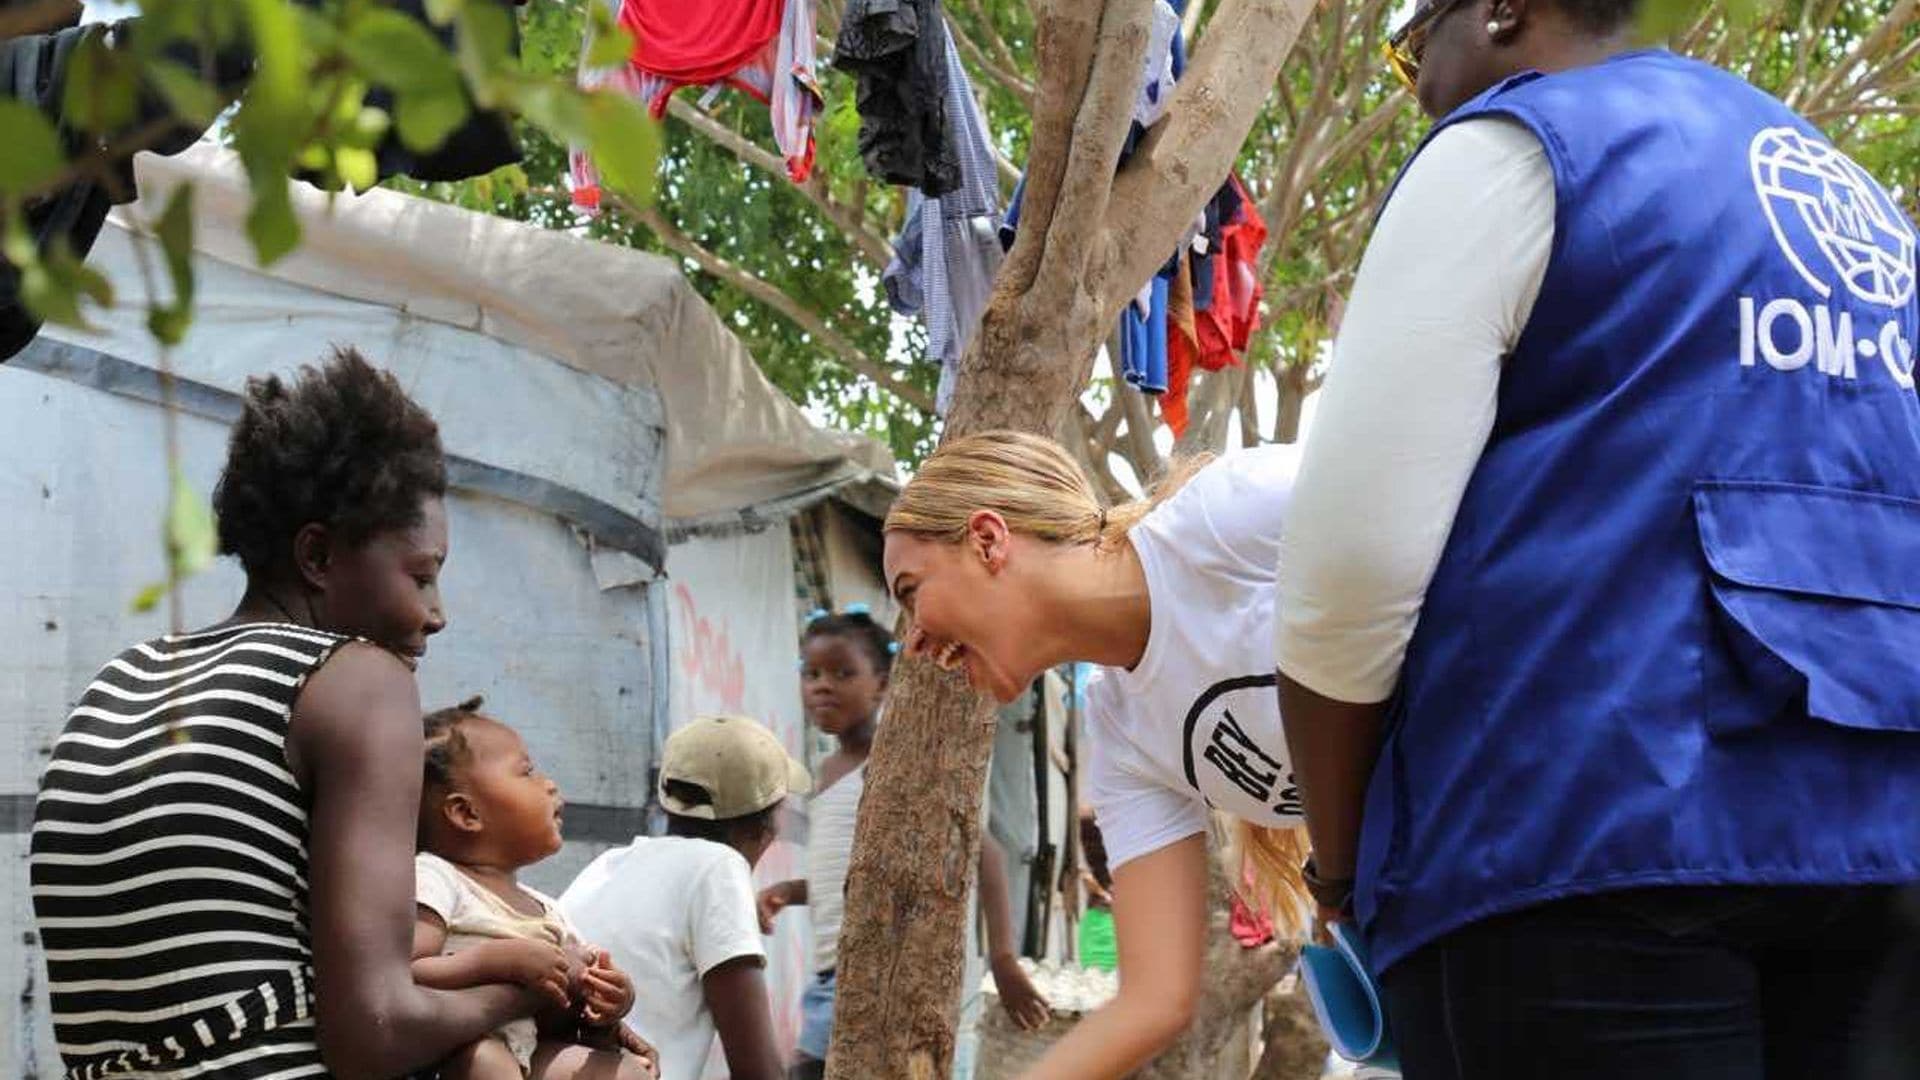 Beyoncé shares touching pictures from humanitarian trip to Haiti